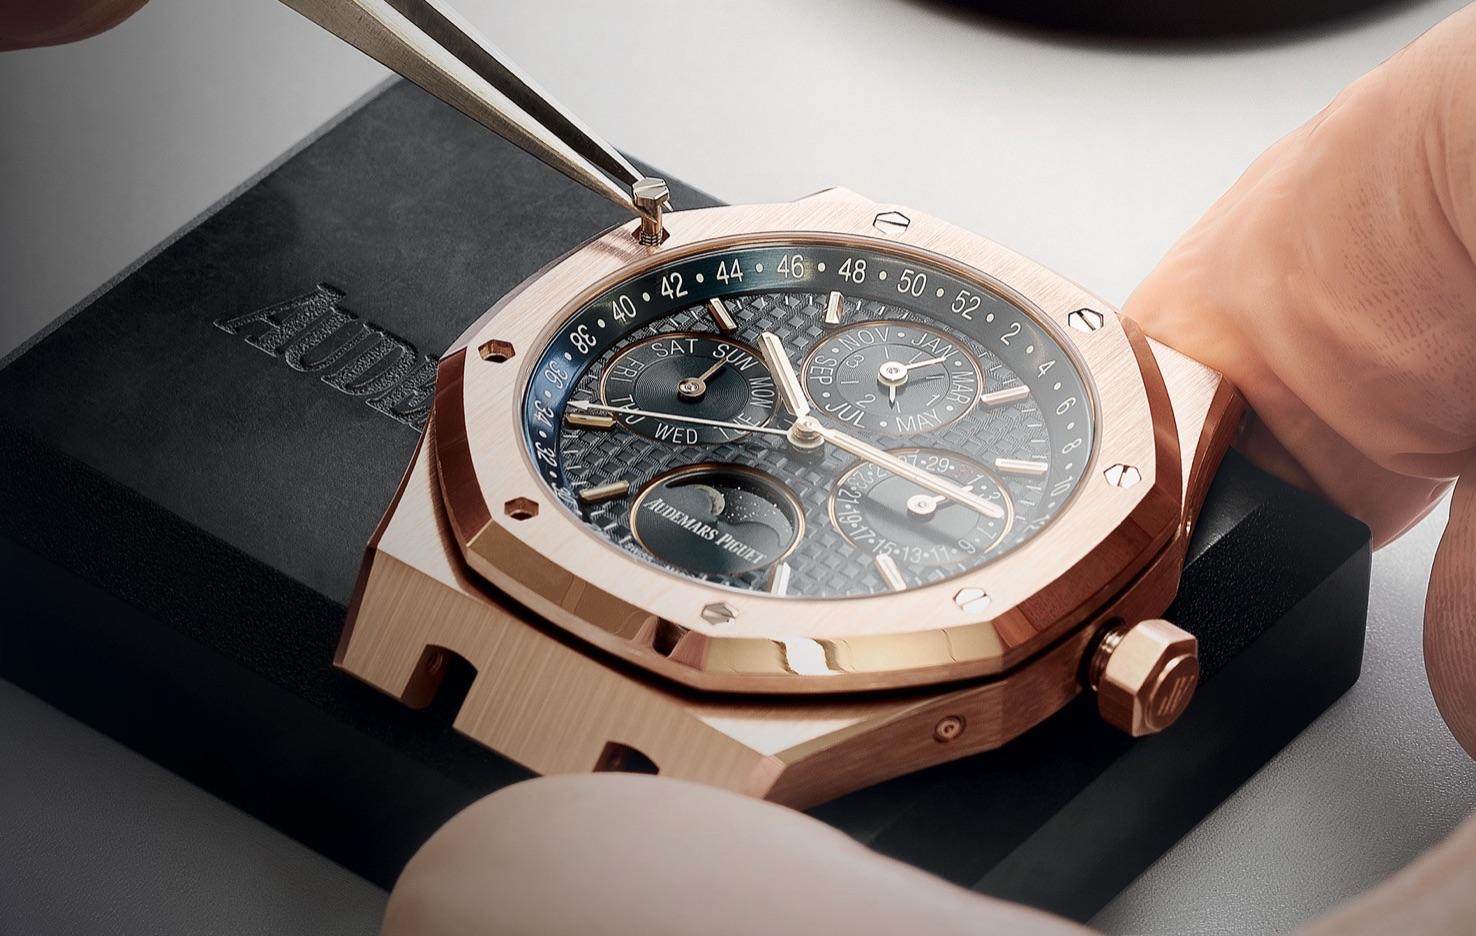 Audemars Piguet Royal Oak and Royal Oak Offshore: What’s the Difference?